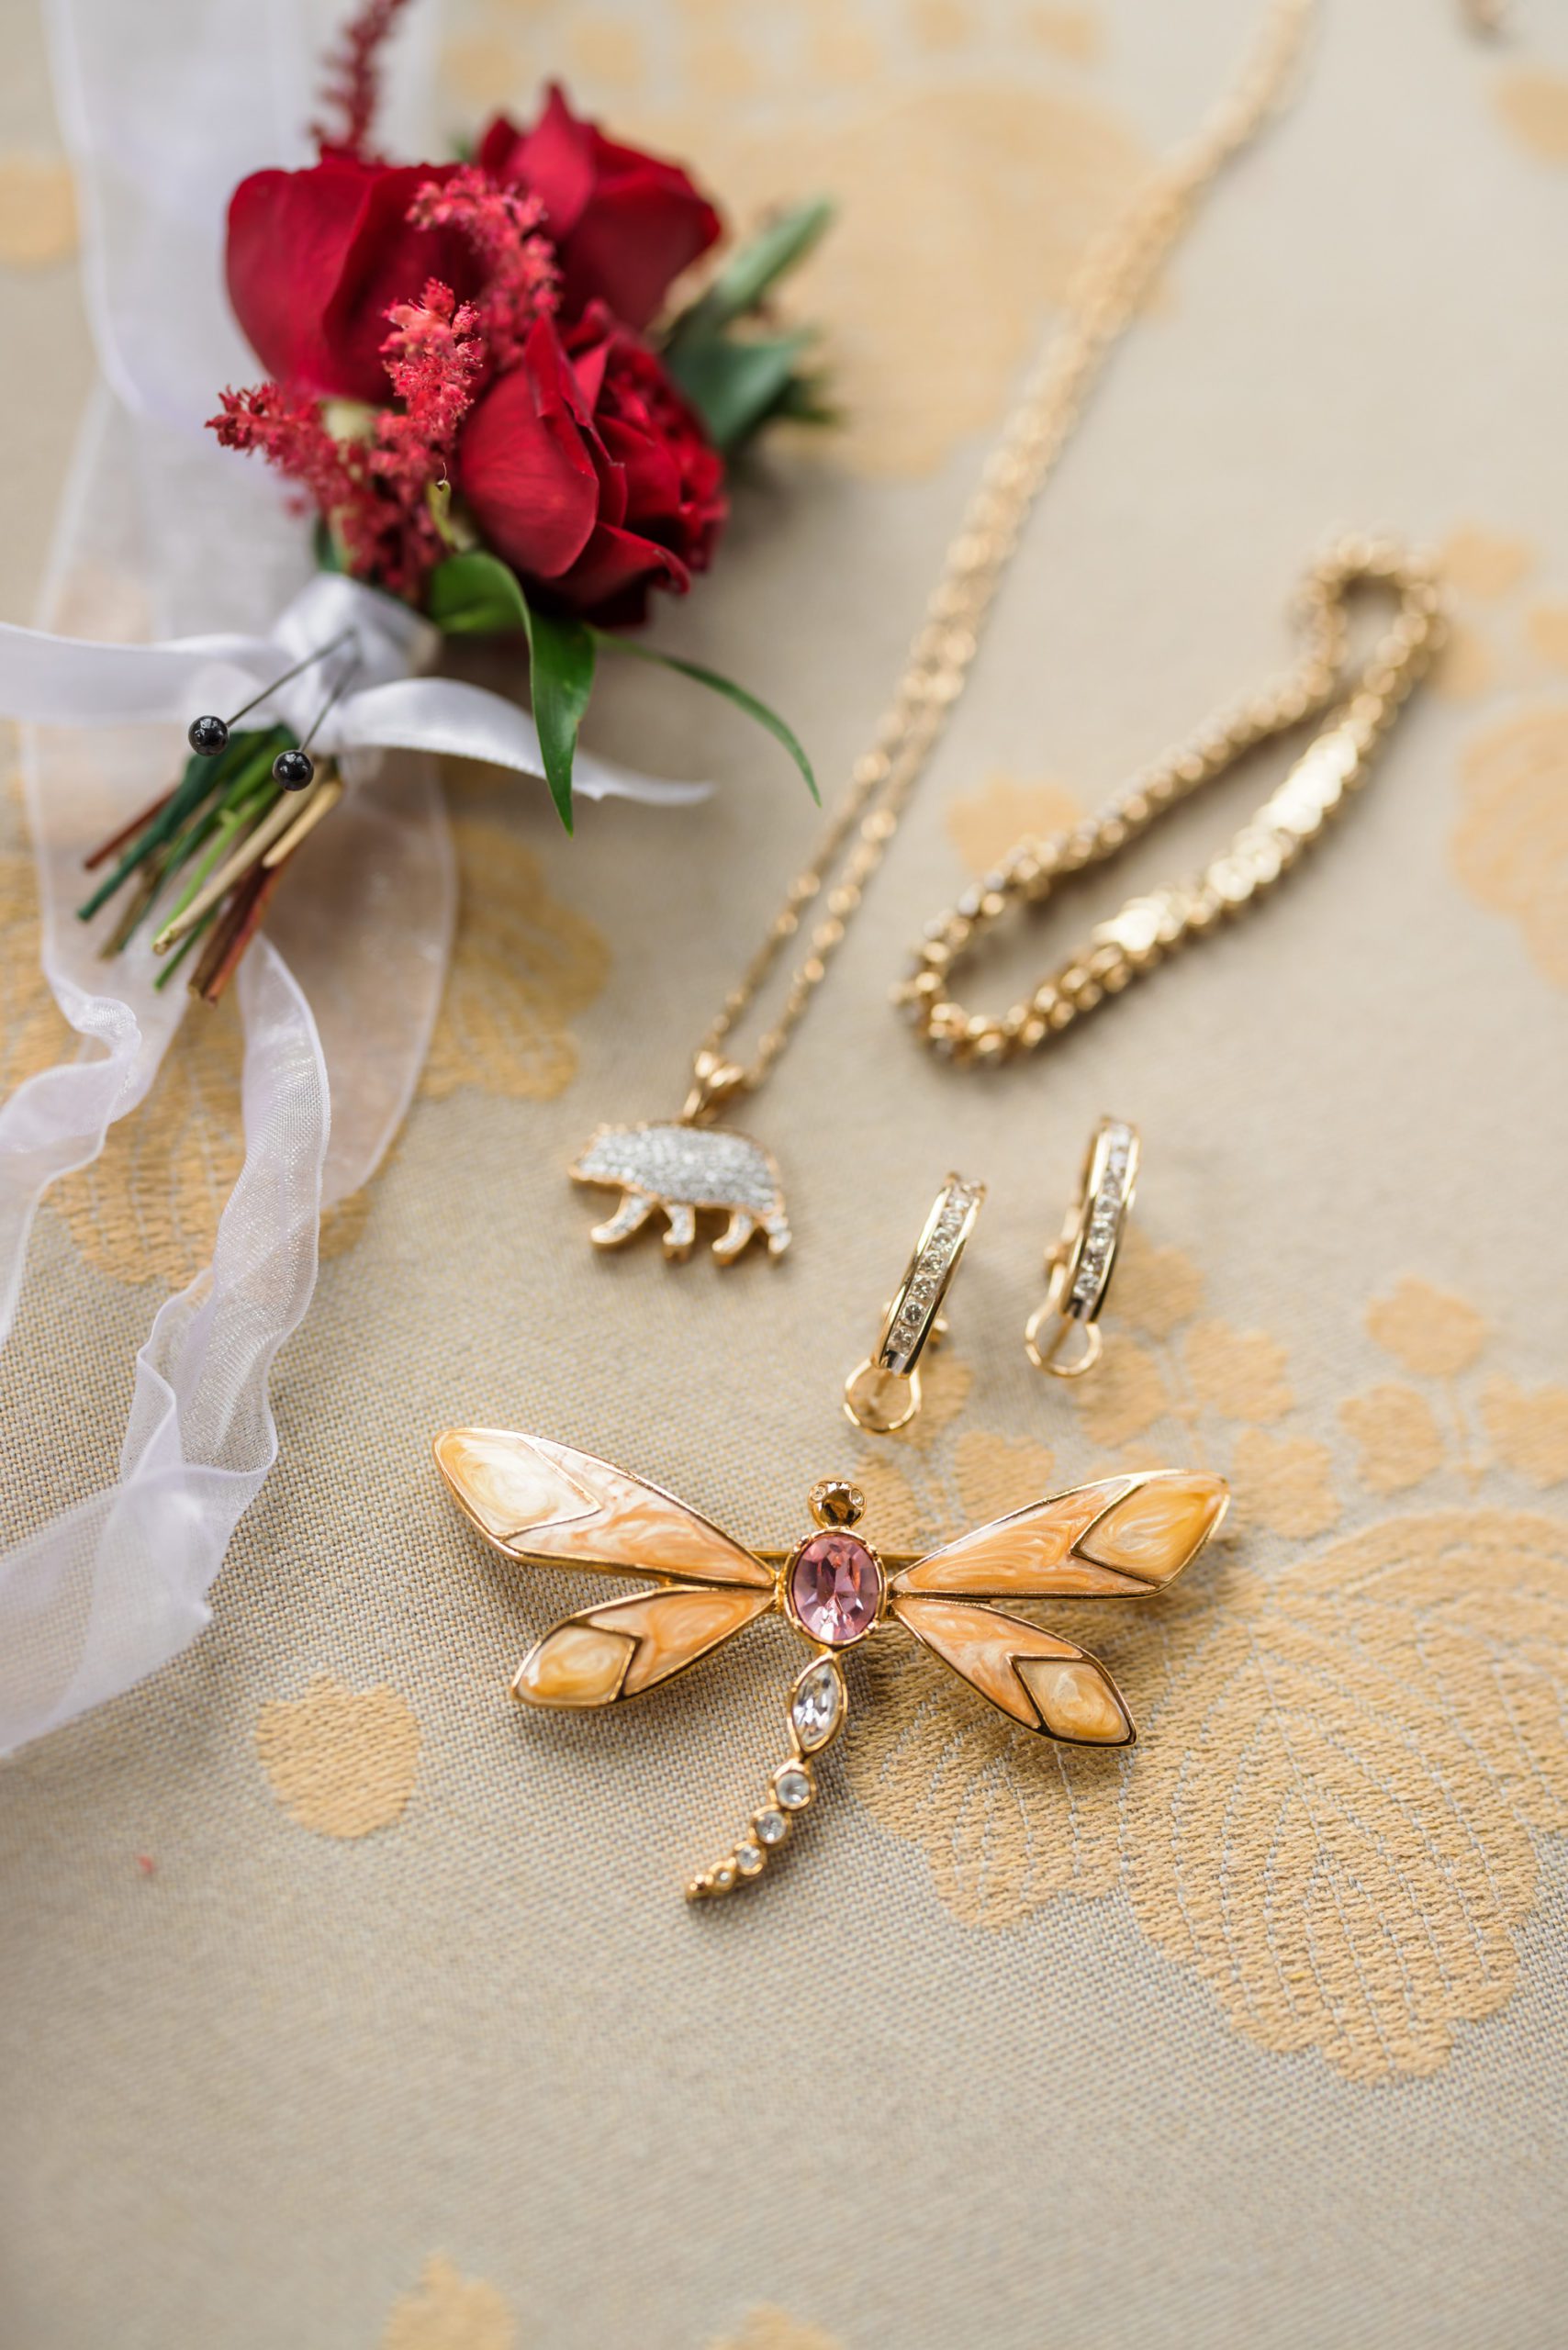 gold dragon fly clip, necklace and other special bridal details